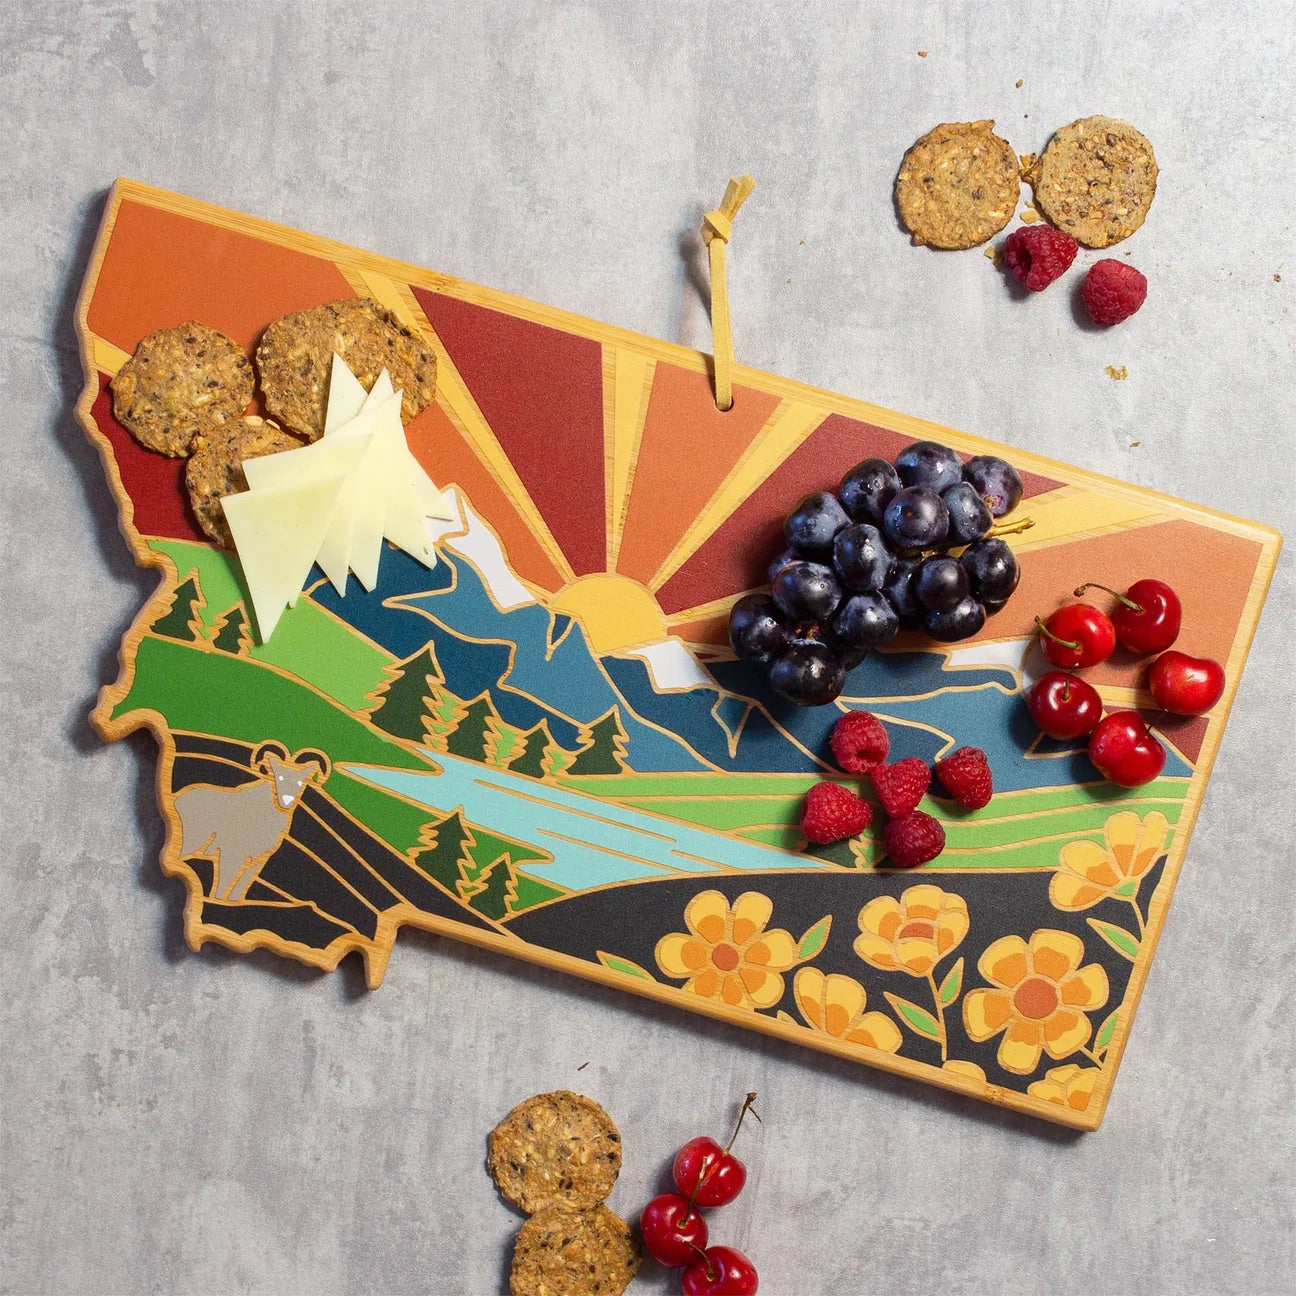 Montana Cutting Board with Artwork by Summer Stokes